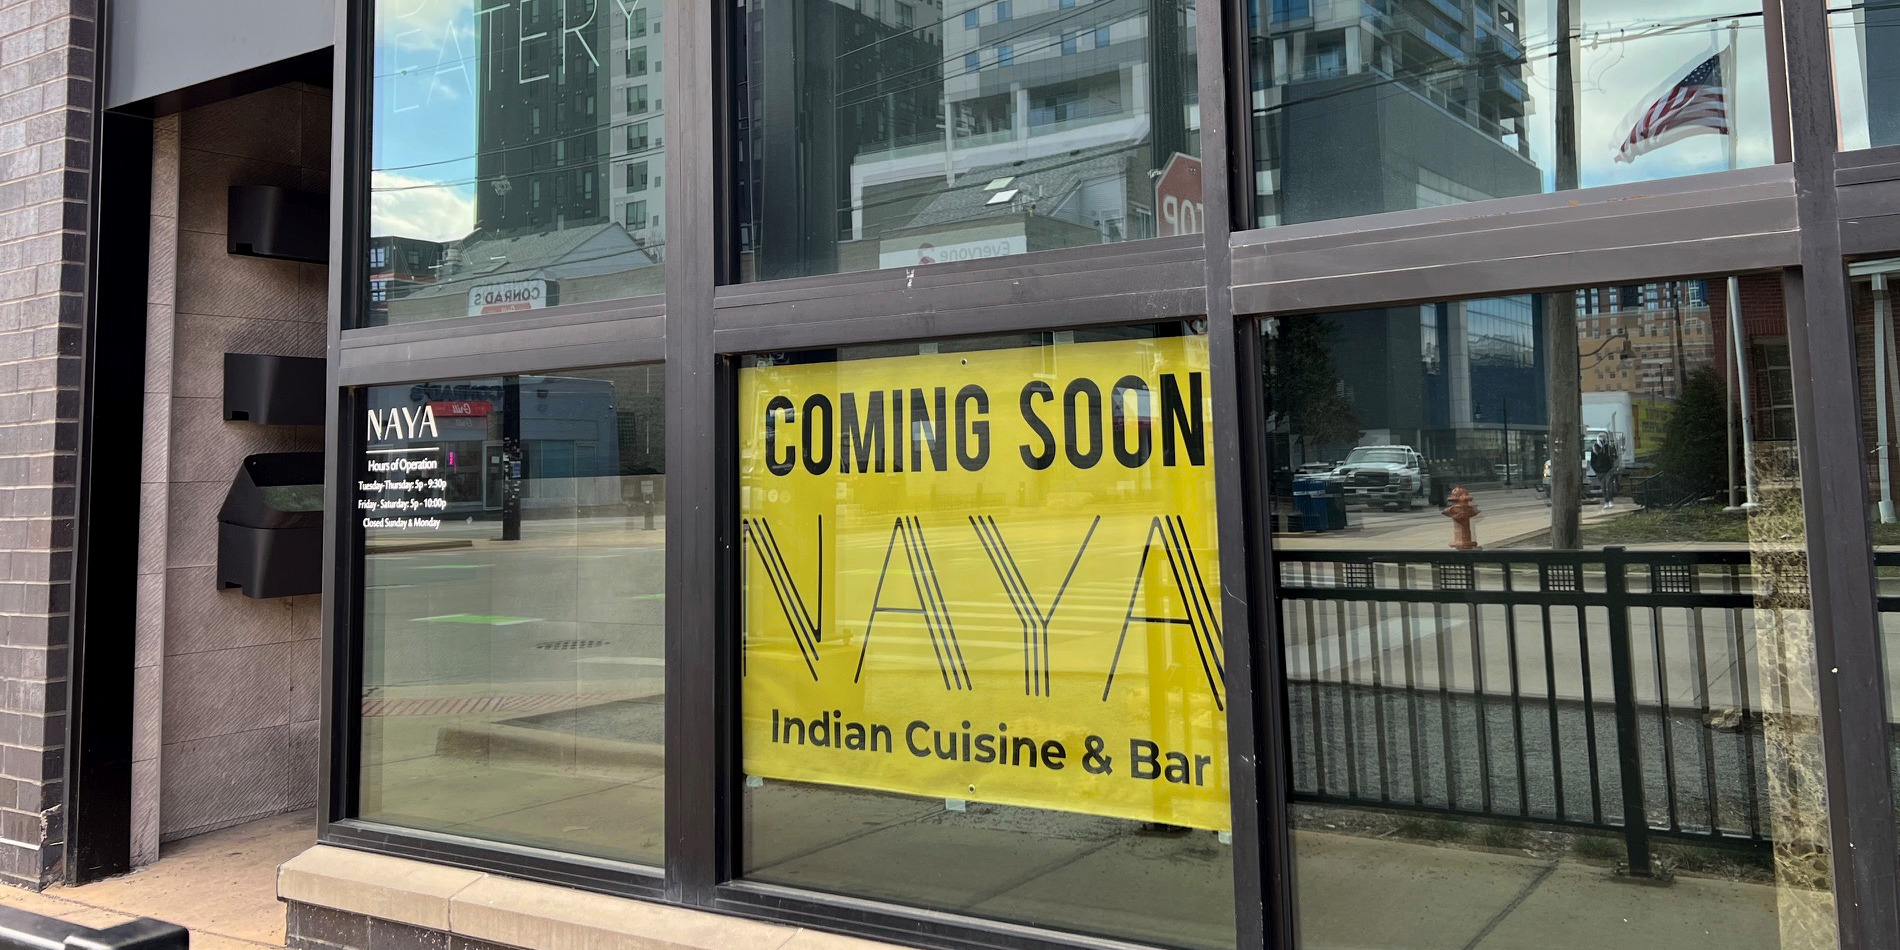 Outside NAYA restaurant, there is a yellow banner reading "Coming soon: NAYA Indian Cuisine & Bar." Photo by Alyssa Buckley.